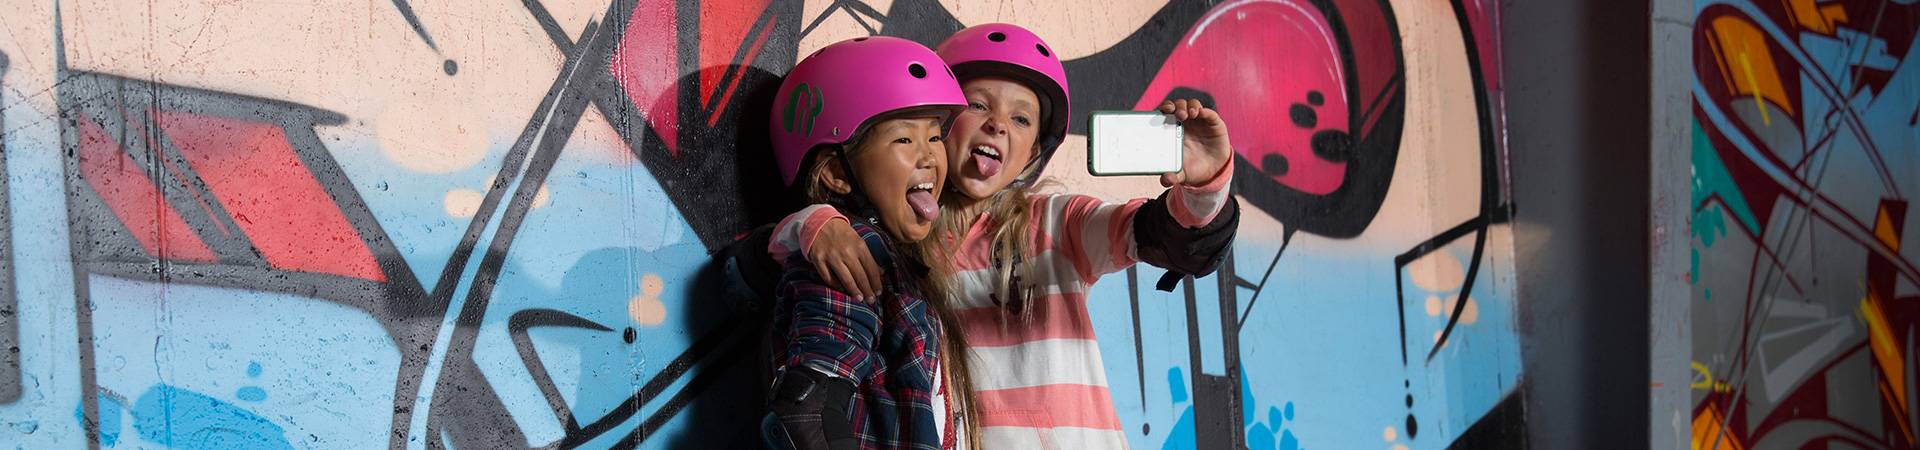  two skater girls taking a selfie in front of a graffiti backdrop 